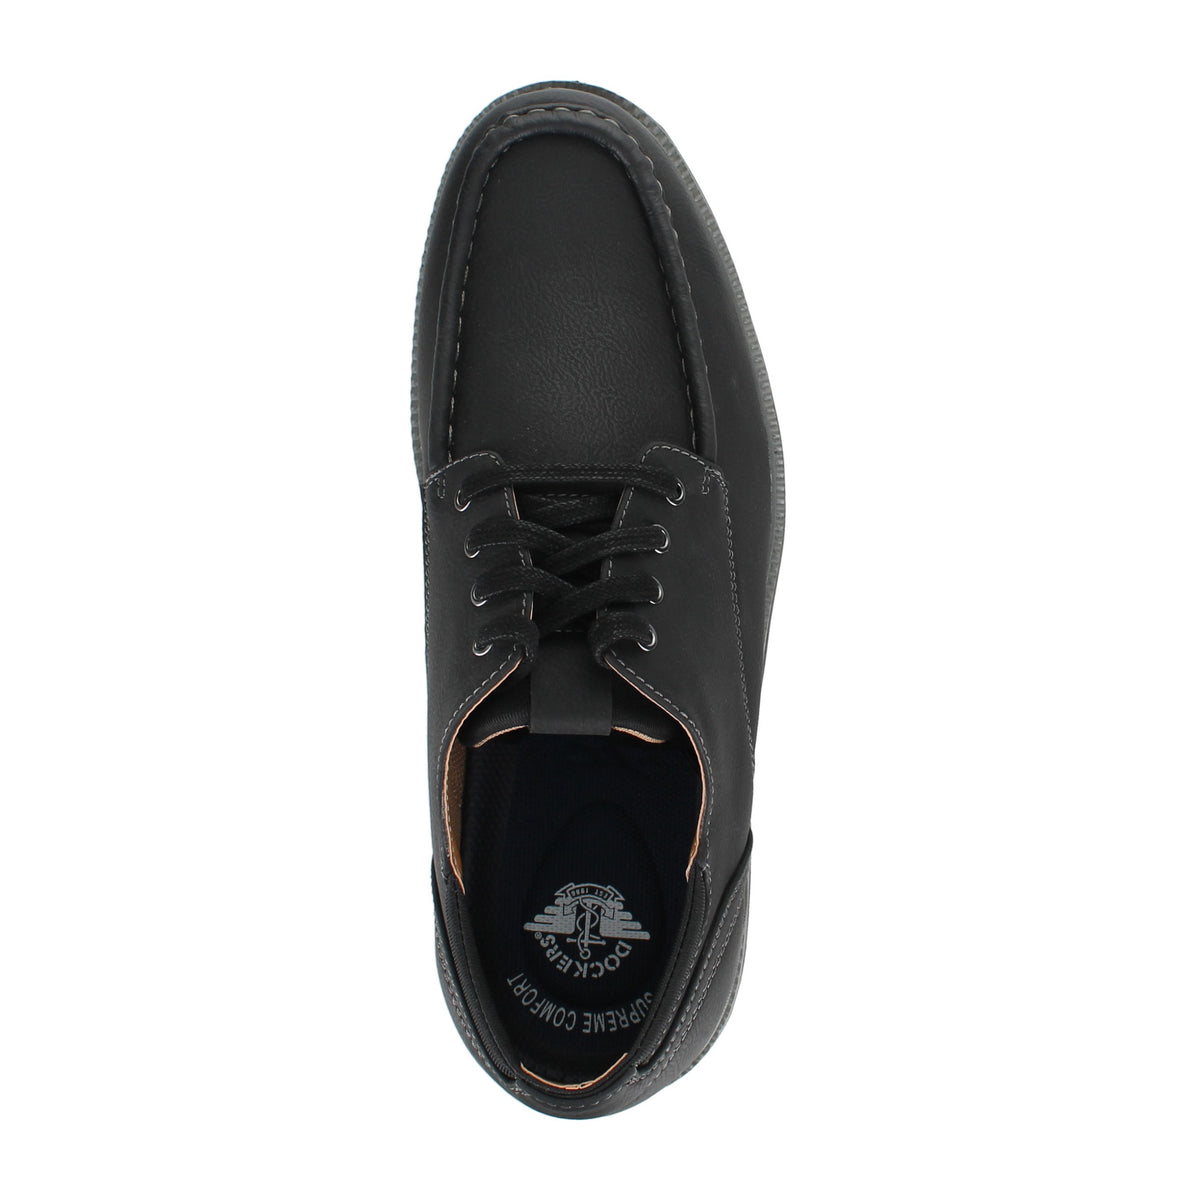 Dockers Shoes Rooney Black Shoes